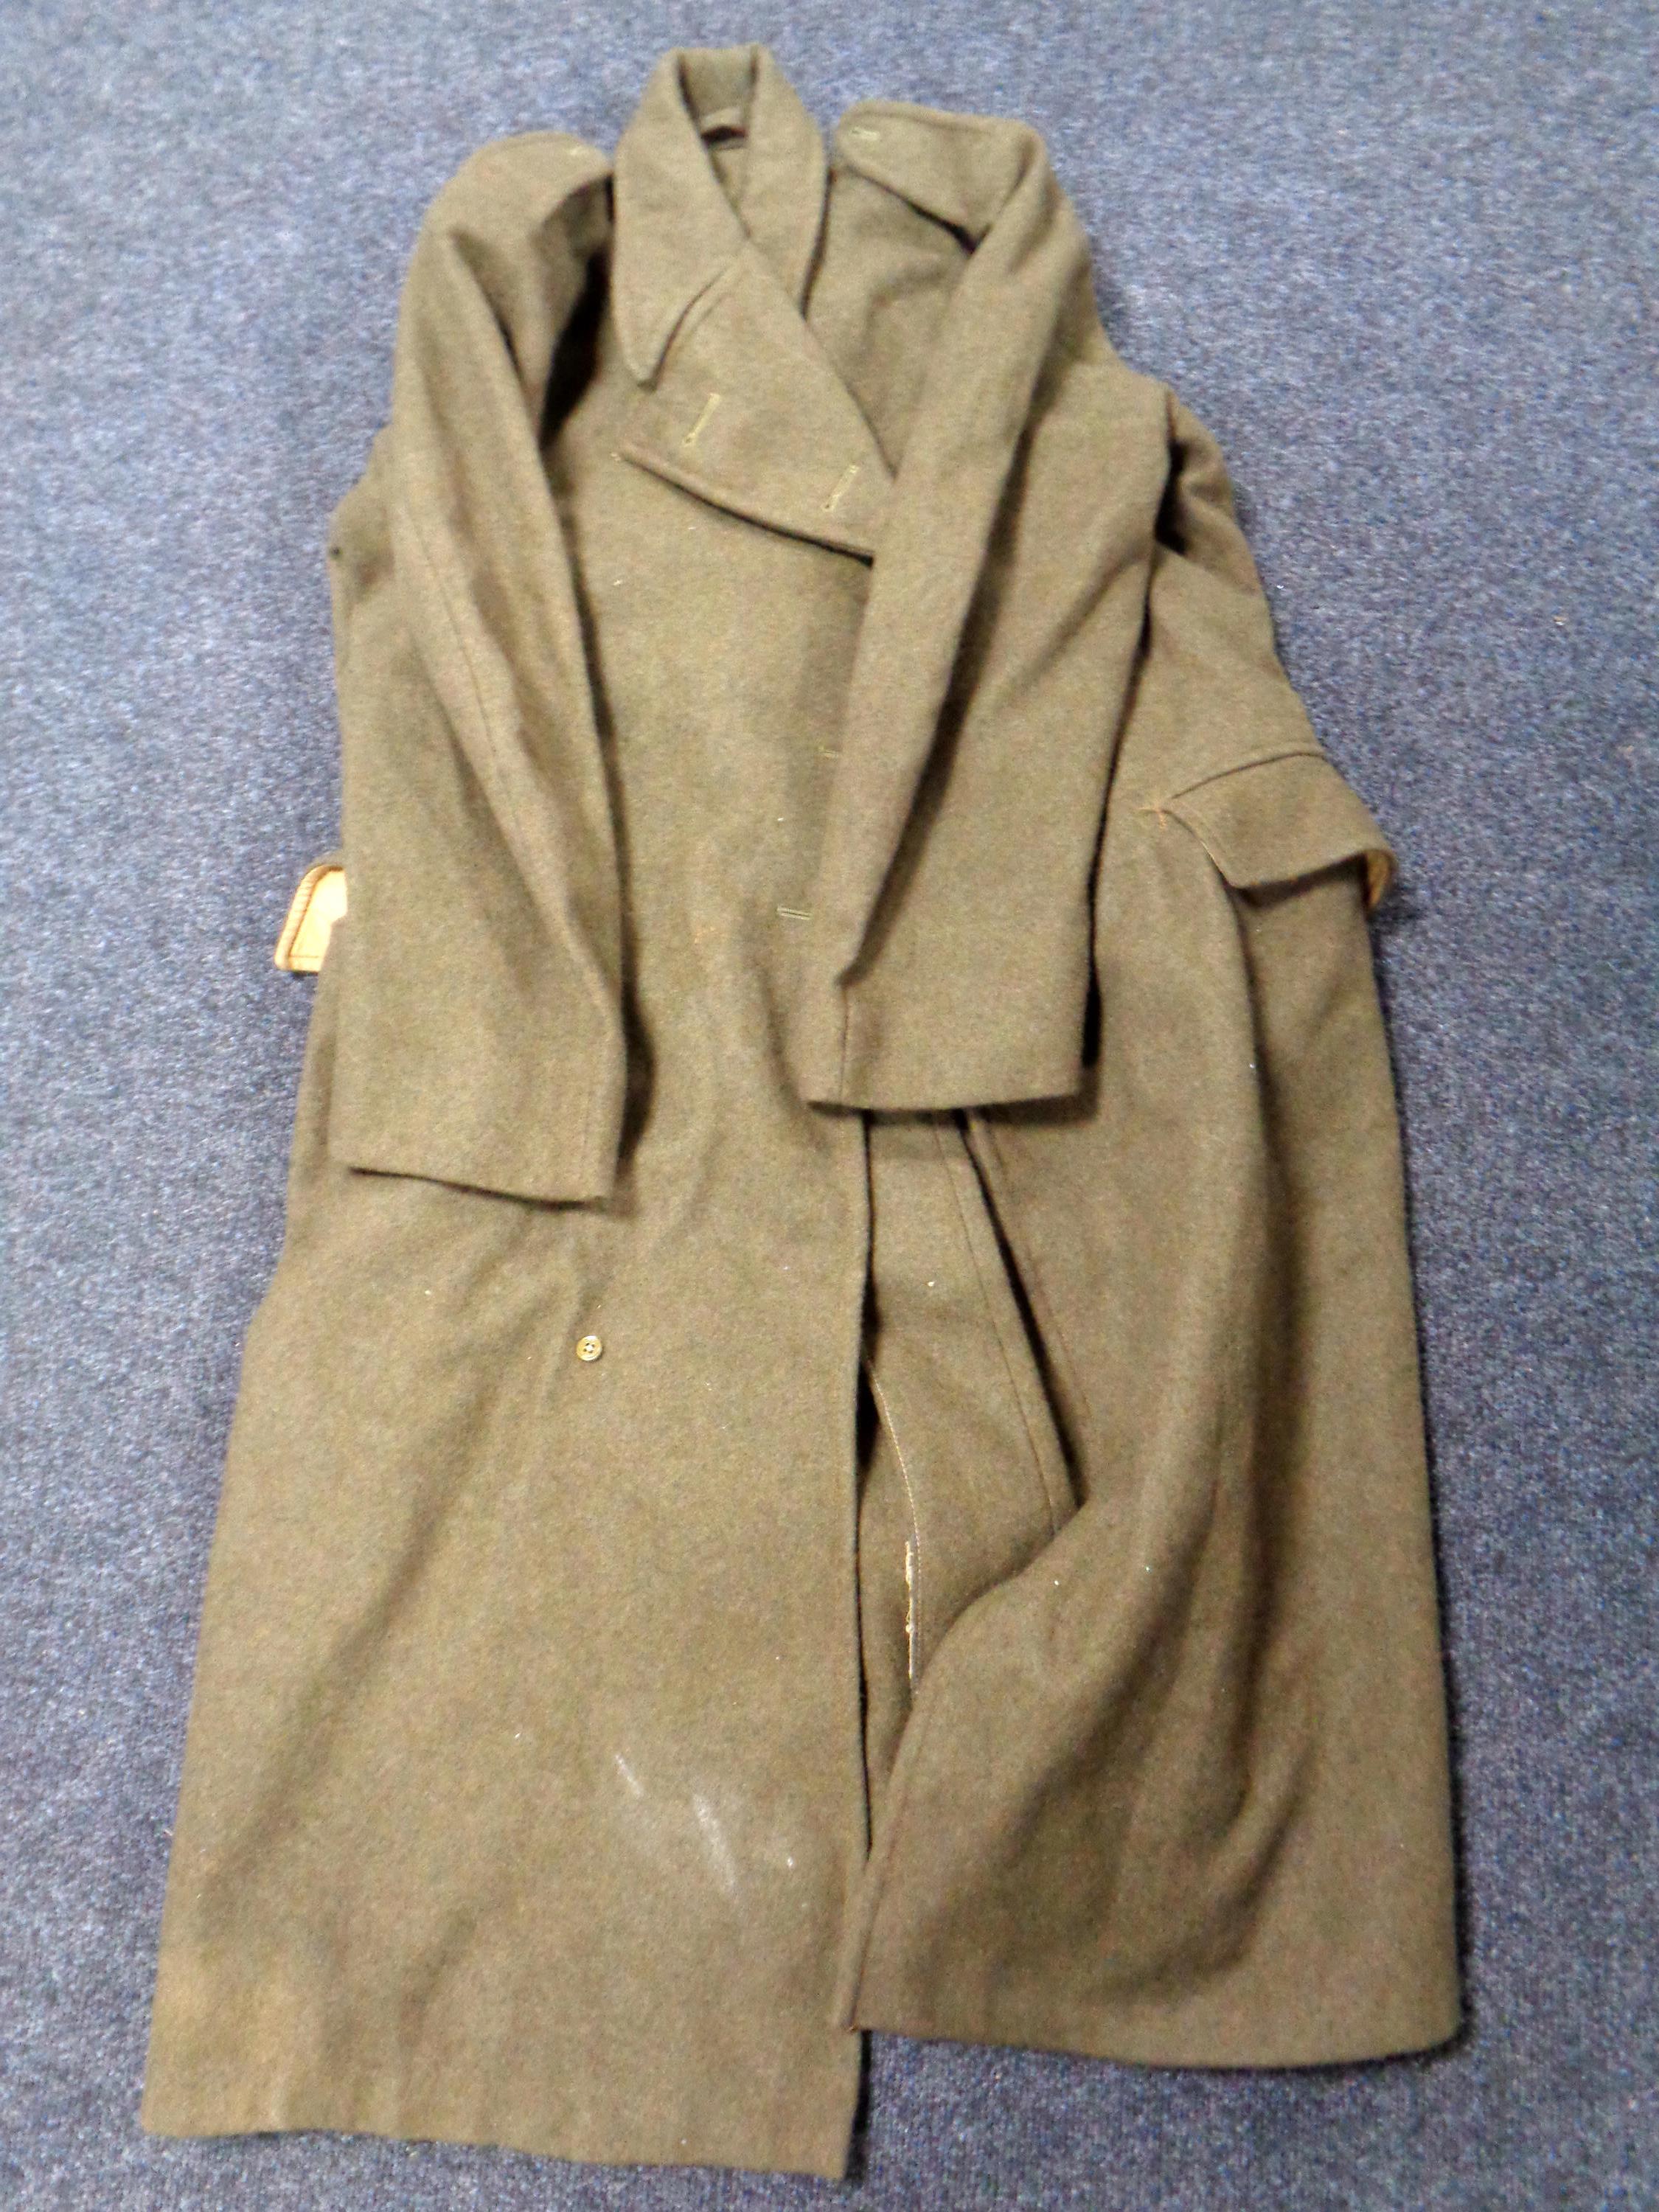 A 20th century British Army greatcoat, dismounted 1951 pattern, size 7.